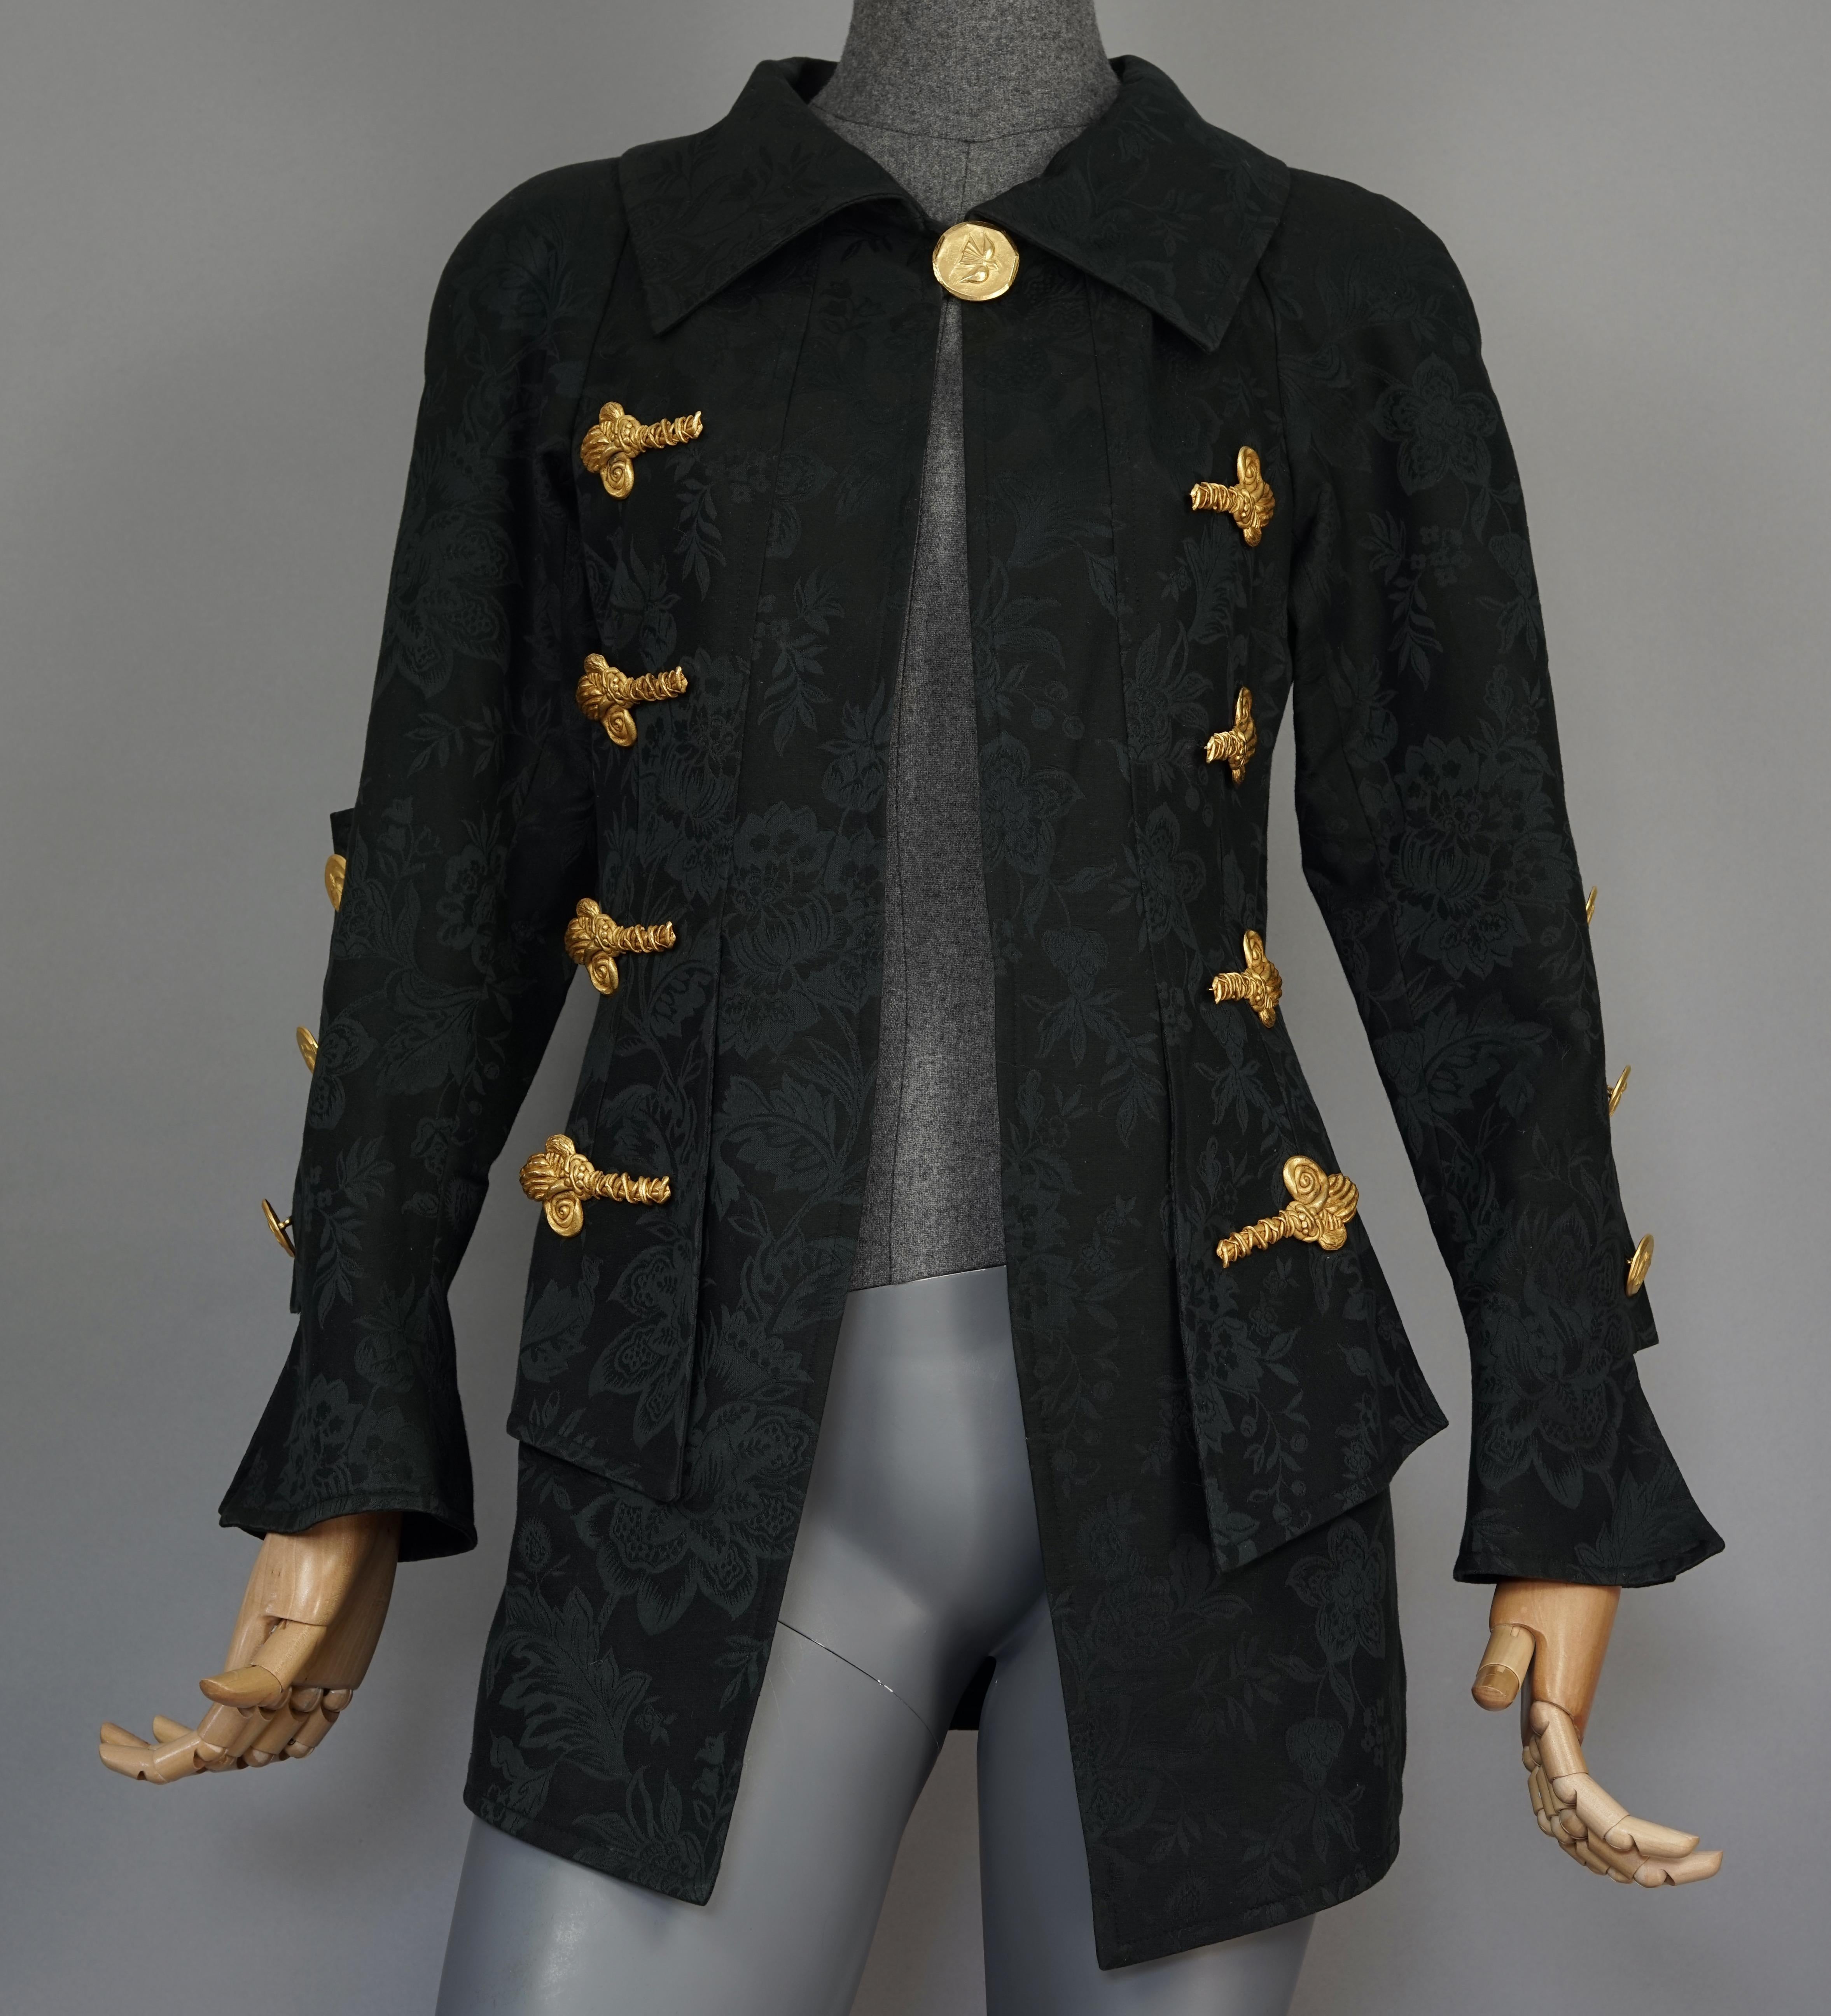 Vintage Rare CHRISTIAN LACROIX Sculptured Gold Metal Buttons Jacquard Blazer Jacket

Measurements taken laid flat, please double bust and waist:
Shoulder: 14.96 inches (38 cm)
Sleeves: 25.19 inches (64 cm)
Bust: 16.53 inches (42 cm)
Waist: 13.78